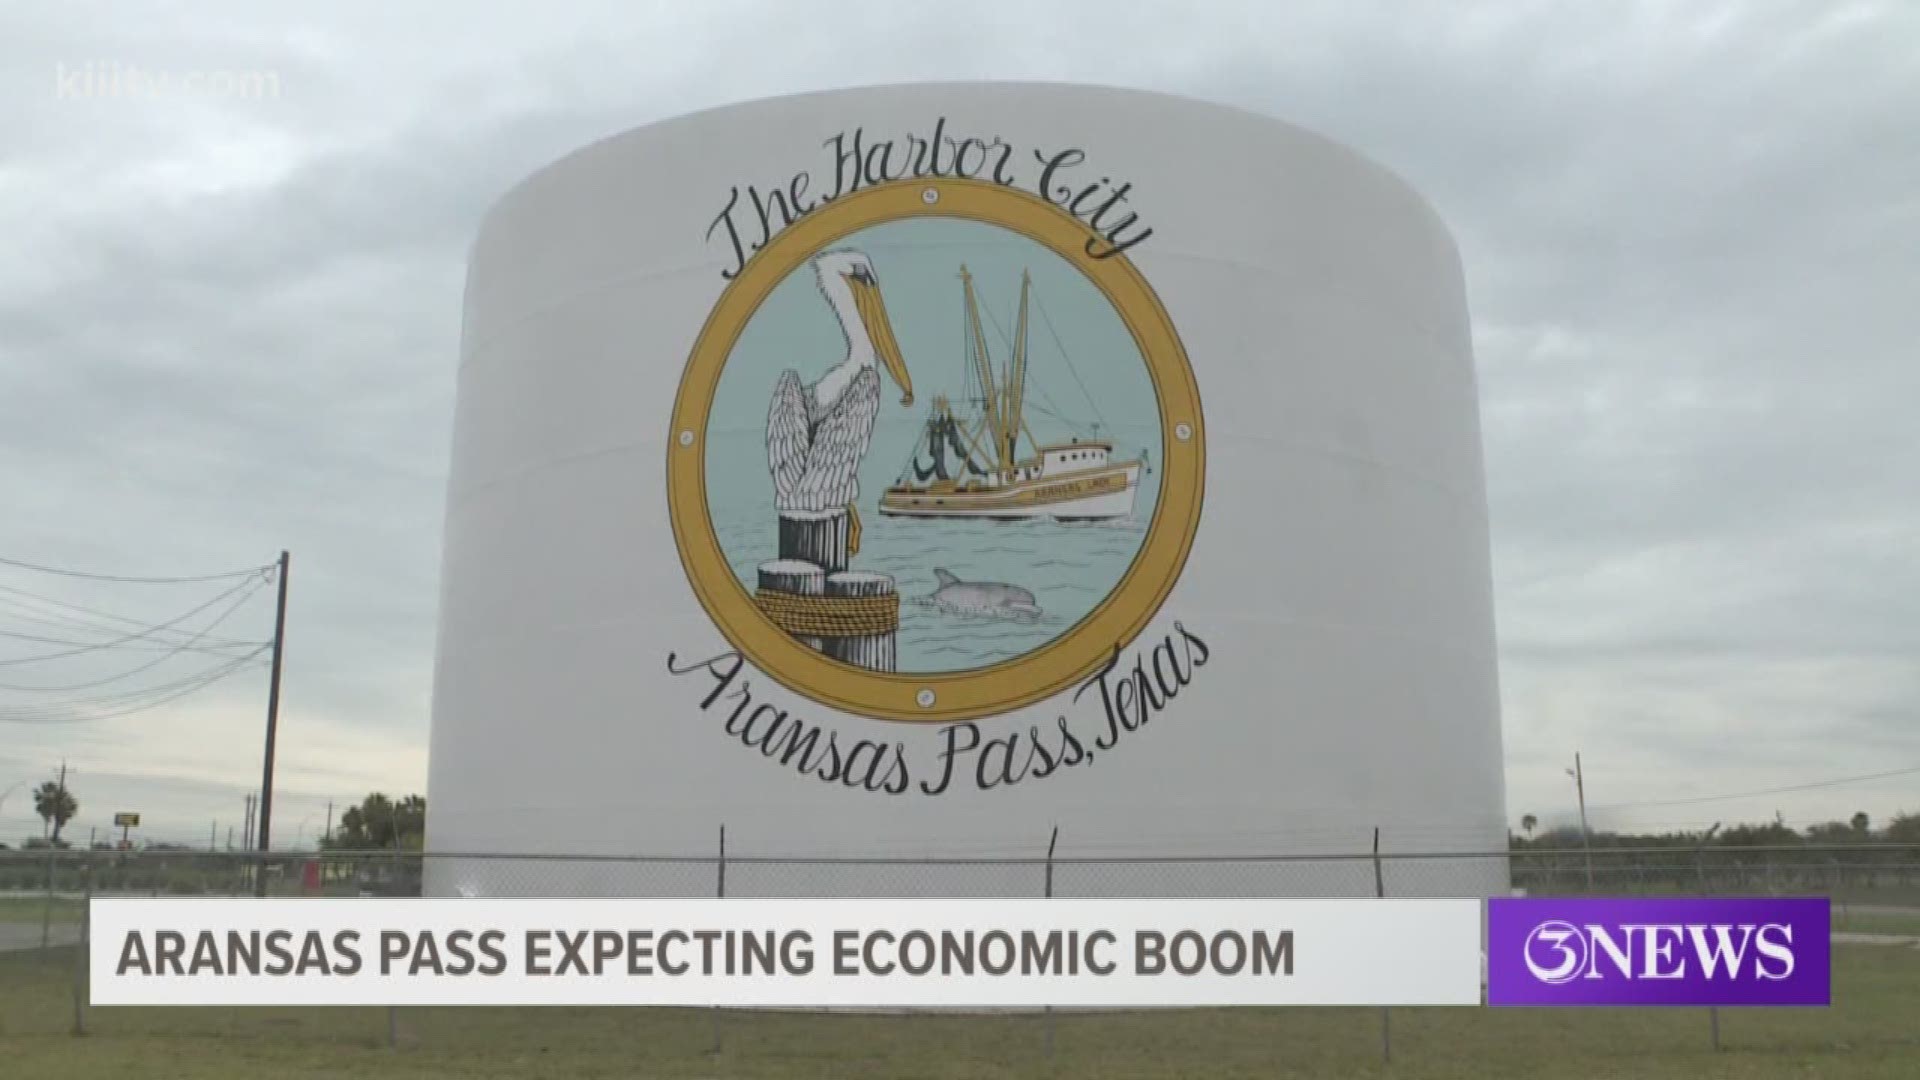 Aransas Pass, Texas, is still in the process of recovering from Hurricane Harvey, but according to their city manager there is a light at the end of the tunnel.